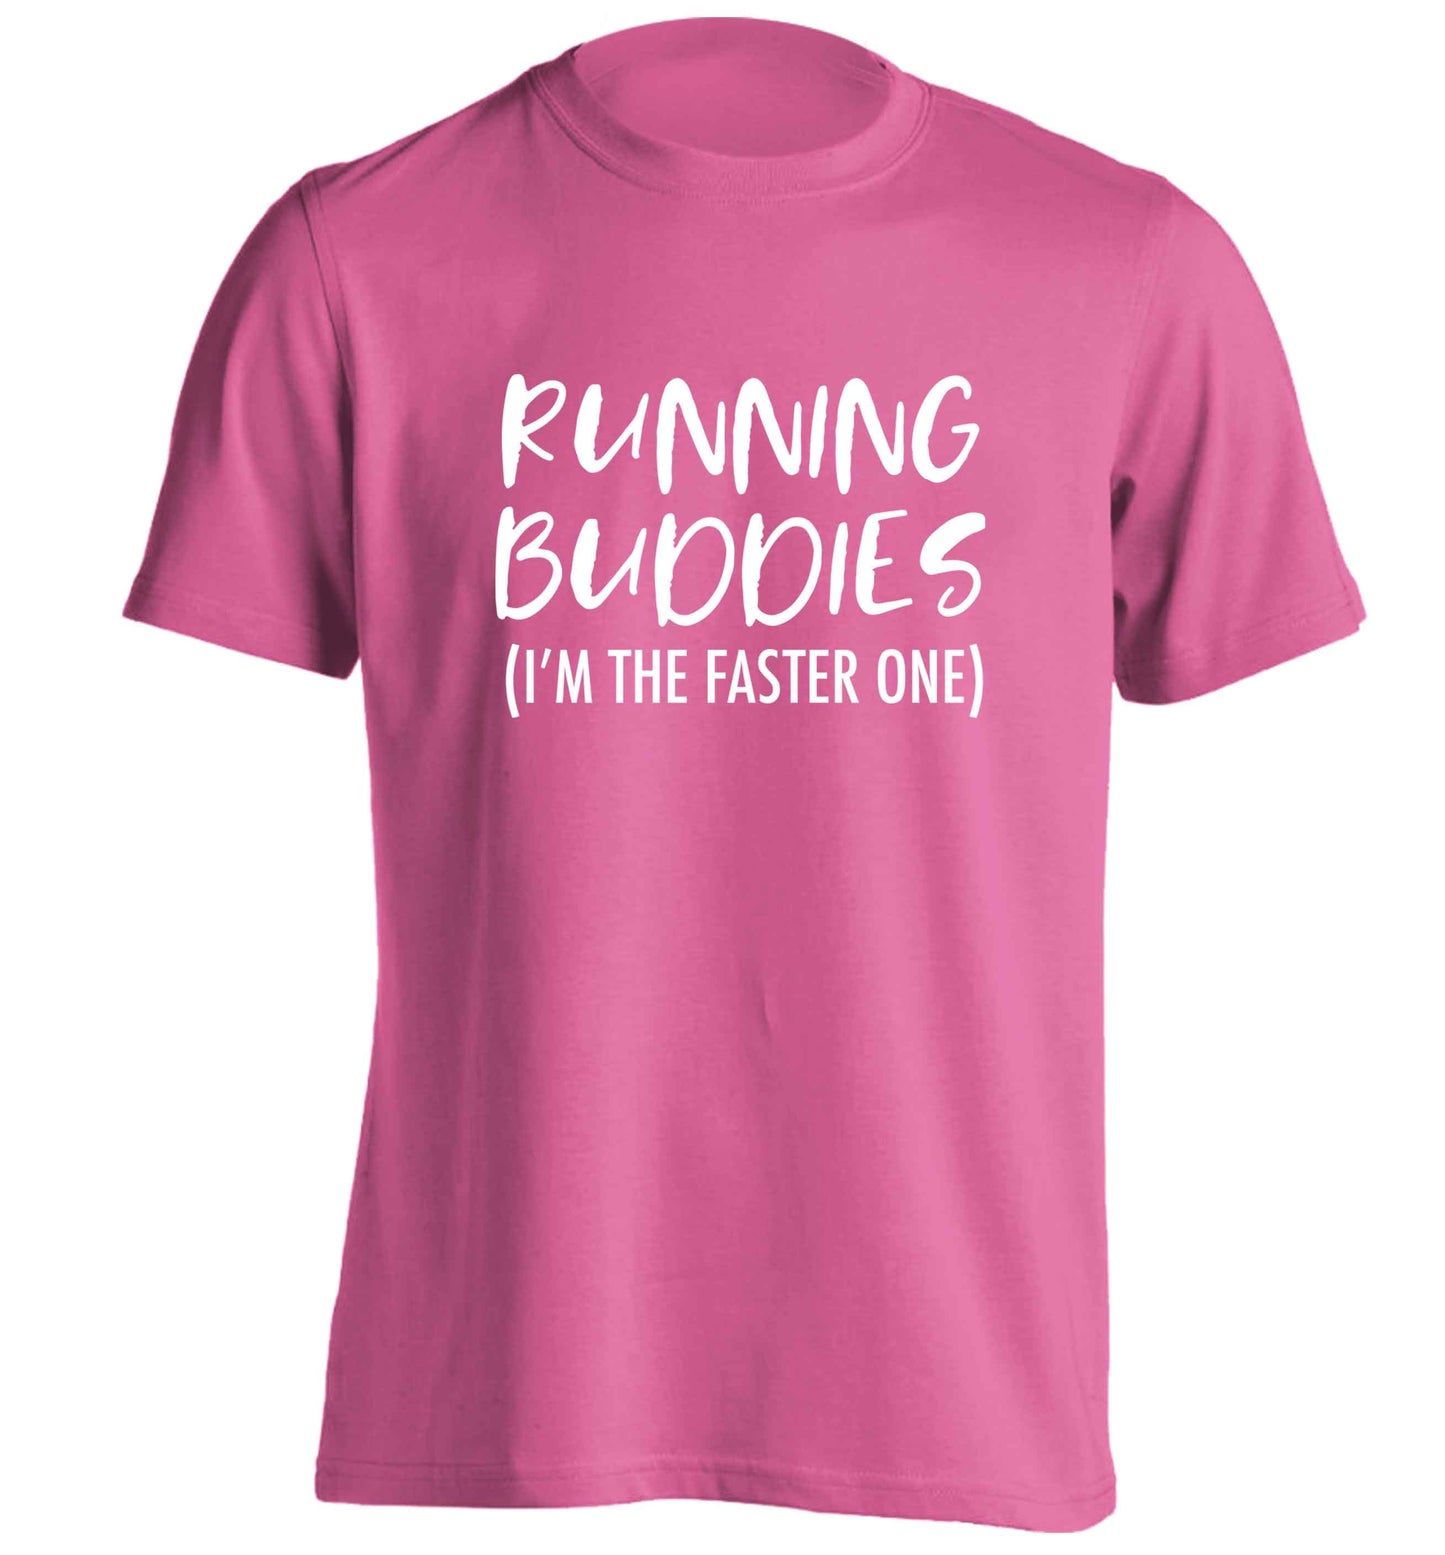 Running buddies (I'm the faster one) adults unisex pink Tshirt 2XL